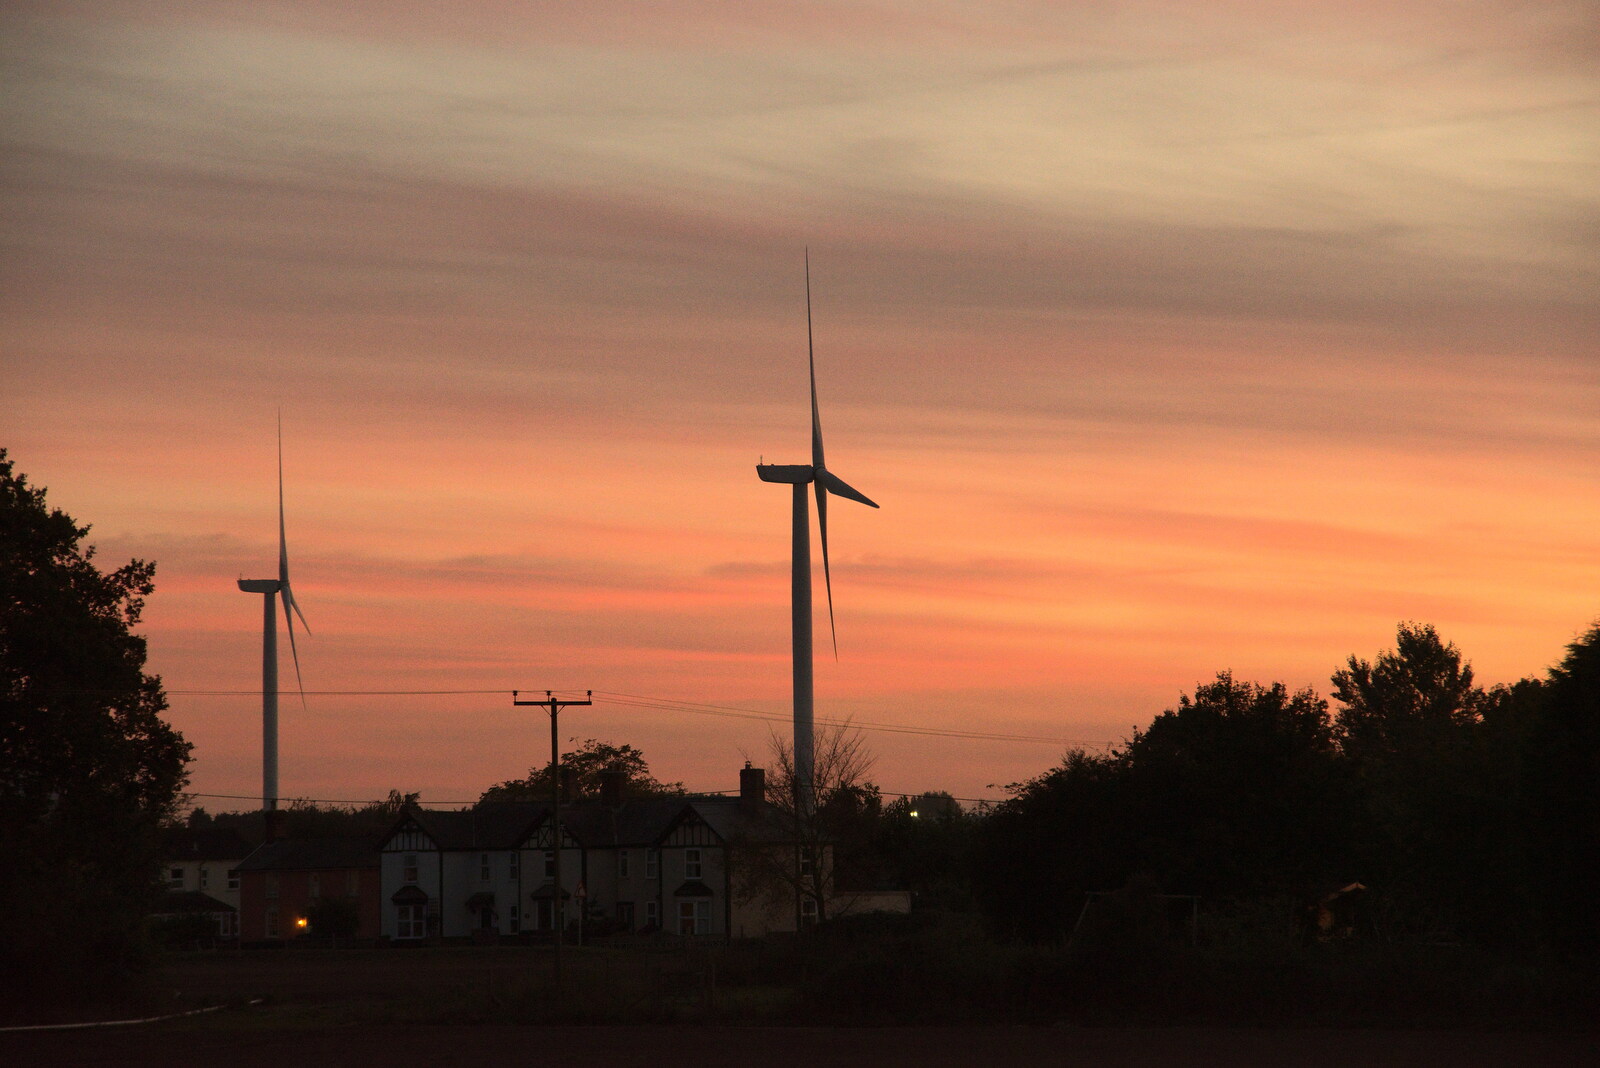 Wind turbines in the sunset from Sunday Lunch at the Village Hall, Brome, Suffolk - 10th October 2021